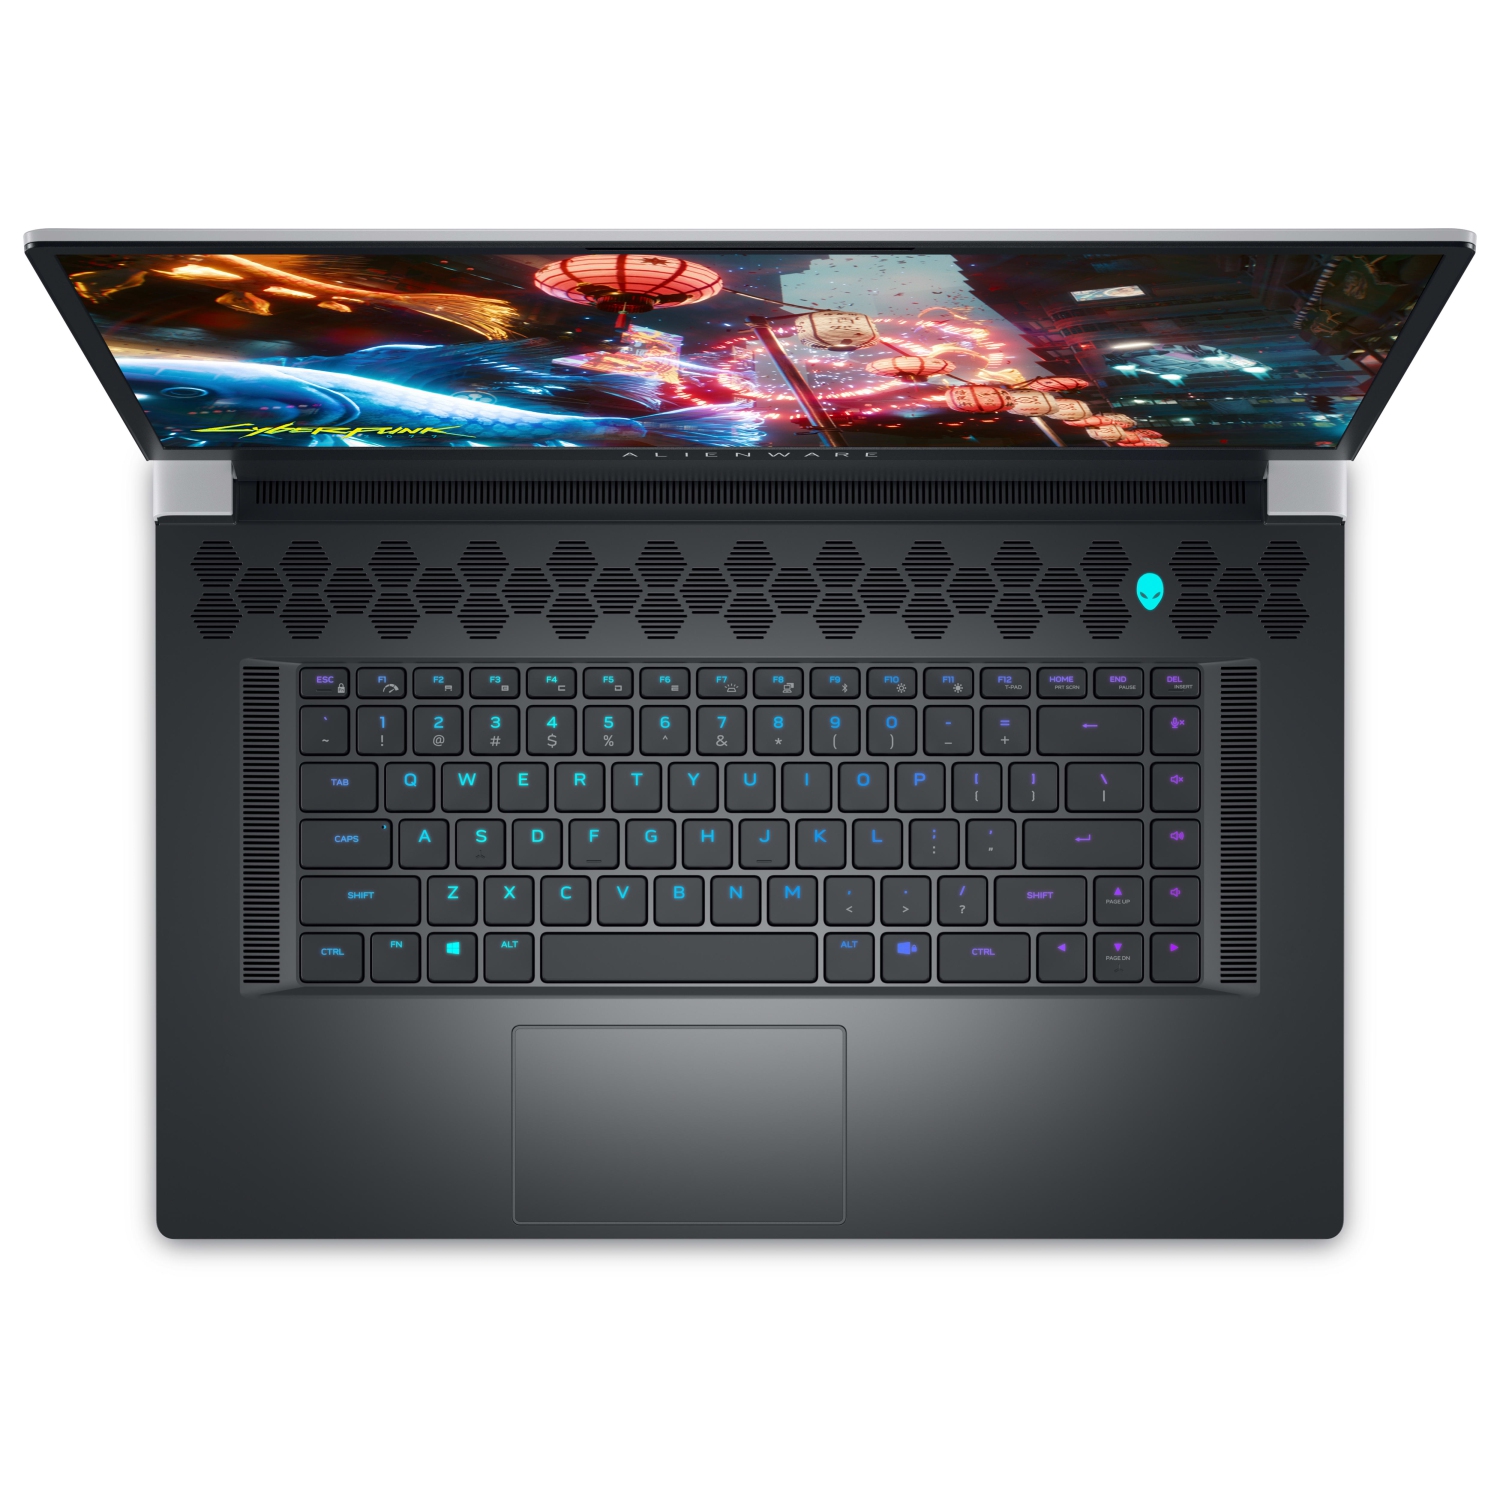 Refurbished (Excellent) – Dell Alienware X17 R2 Gaming Laptop (2022) | 17.3" 4K | Core i9 - 1TB SSD - 32GB RAM - RTX 3080 | 14 Cores @ 5 GHz - 12th Gen CPU - 8GB GDDR6X